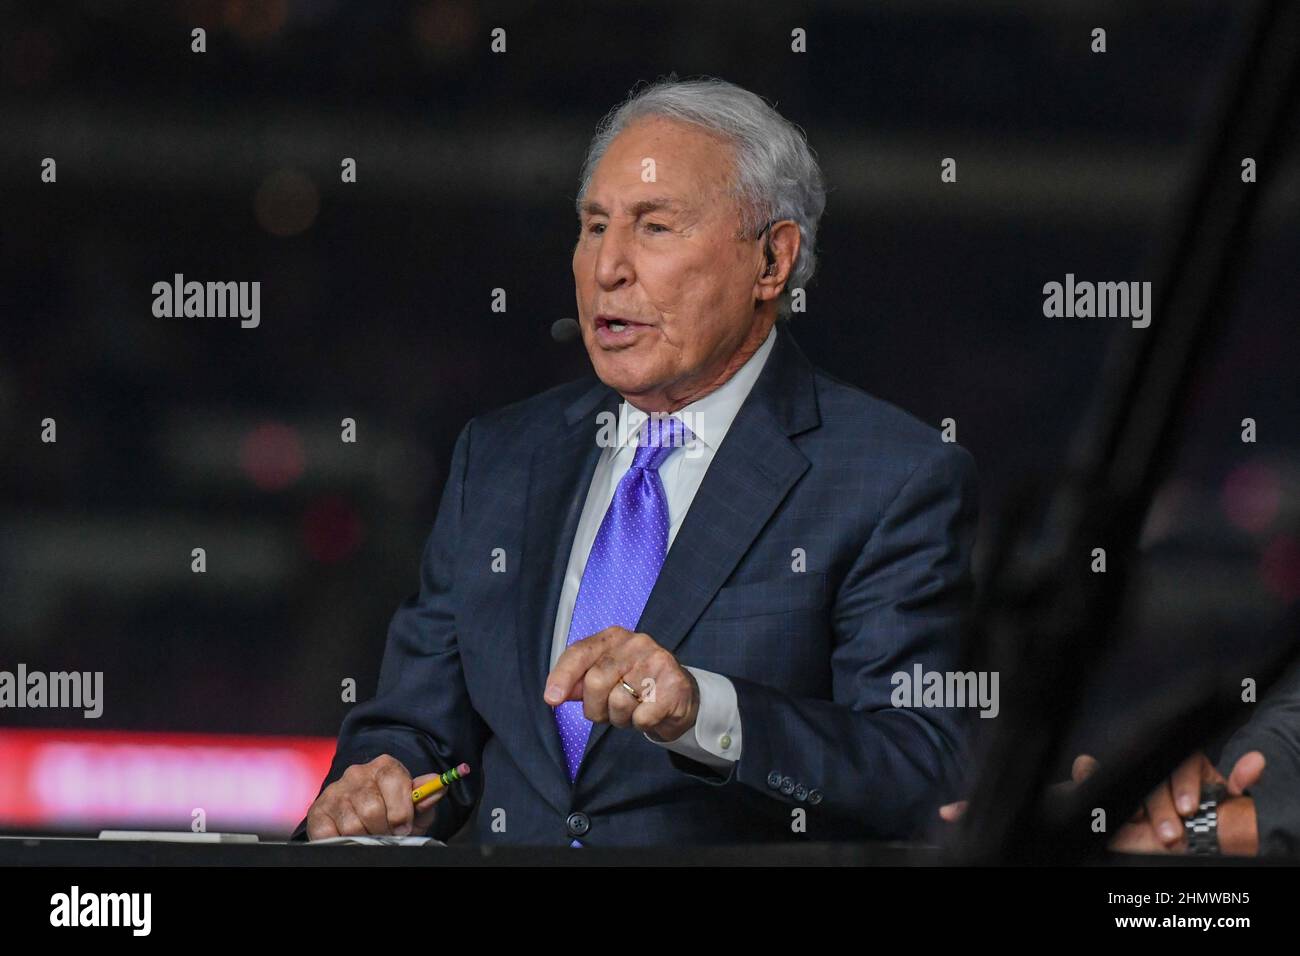 ESPN analyst Lee Corso before the College Football National Championship game between Alabama Crimson Tide and Georgia Bulldogs, Monday, Jan. 10, 2022 Stock Photo